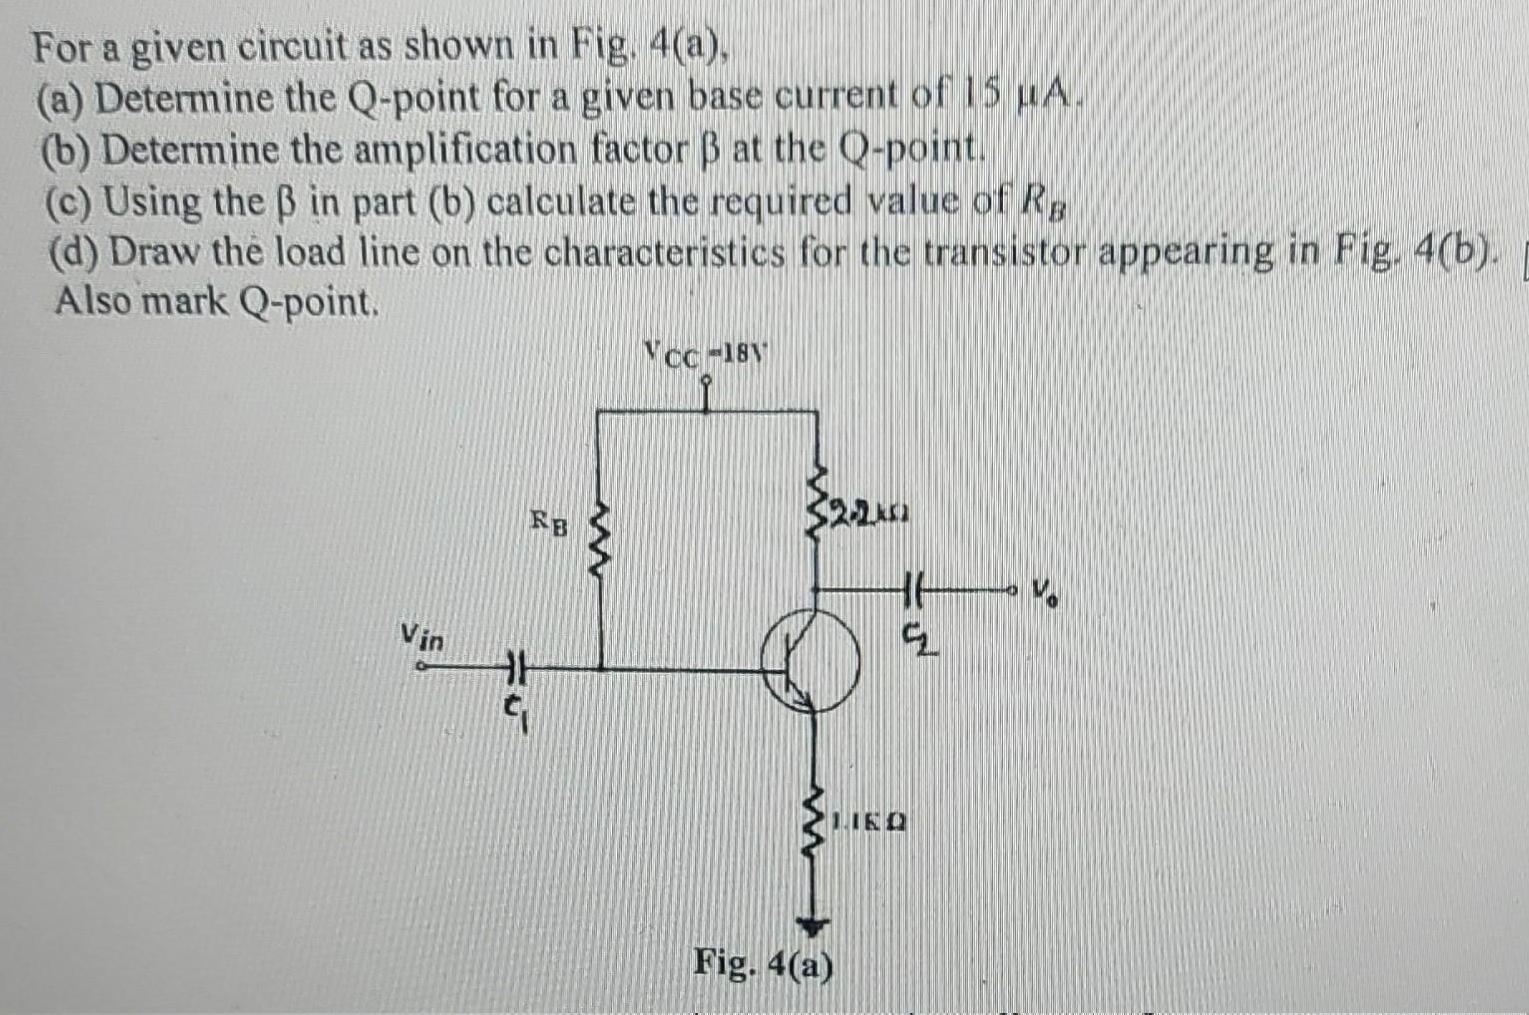 For a given circuit as shown in Fig. 4(a). (a) Determine the Q-point for a given base current of 15 A. (b)